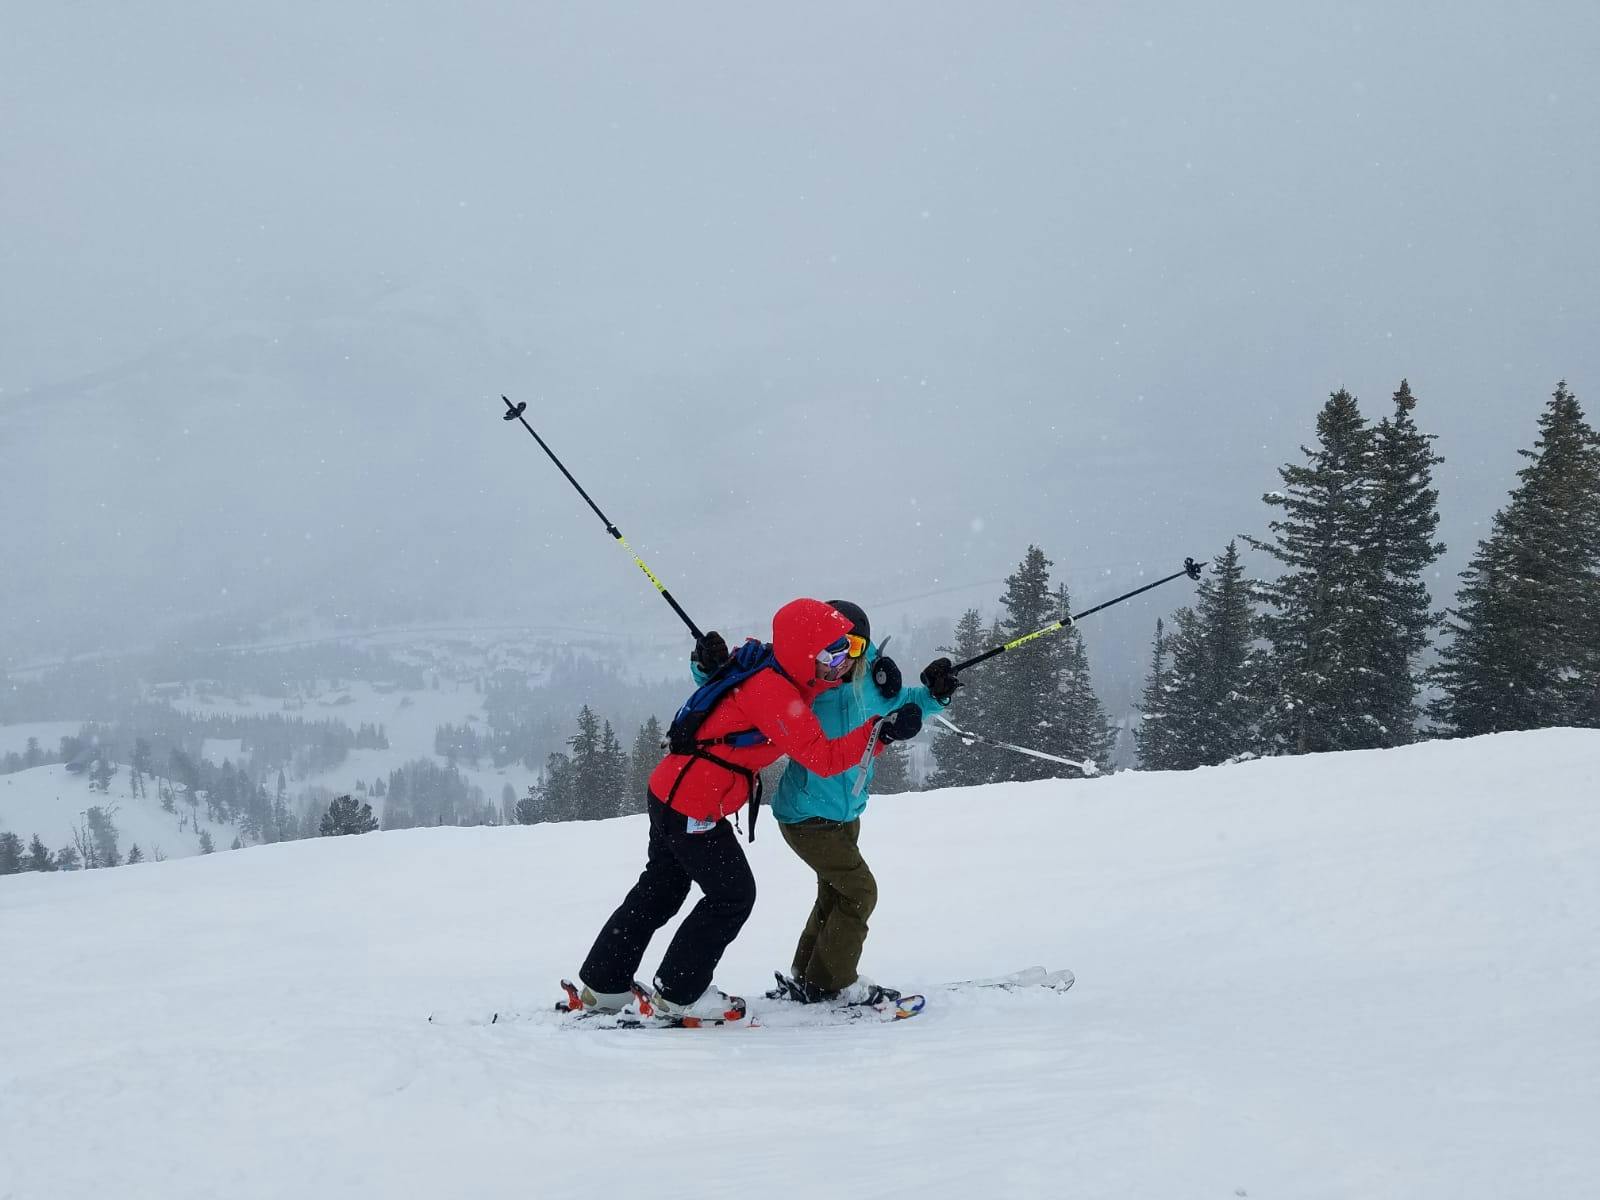 Two skiers on a hill hug each other with their poles in the air.